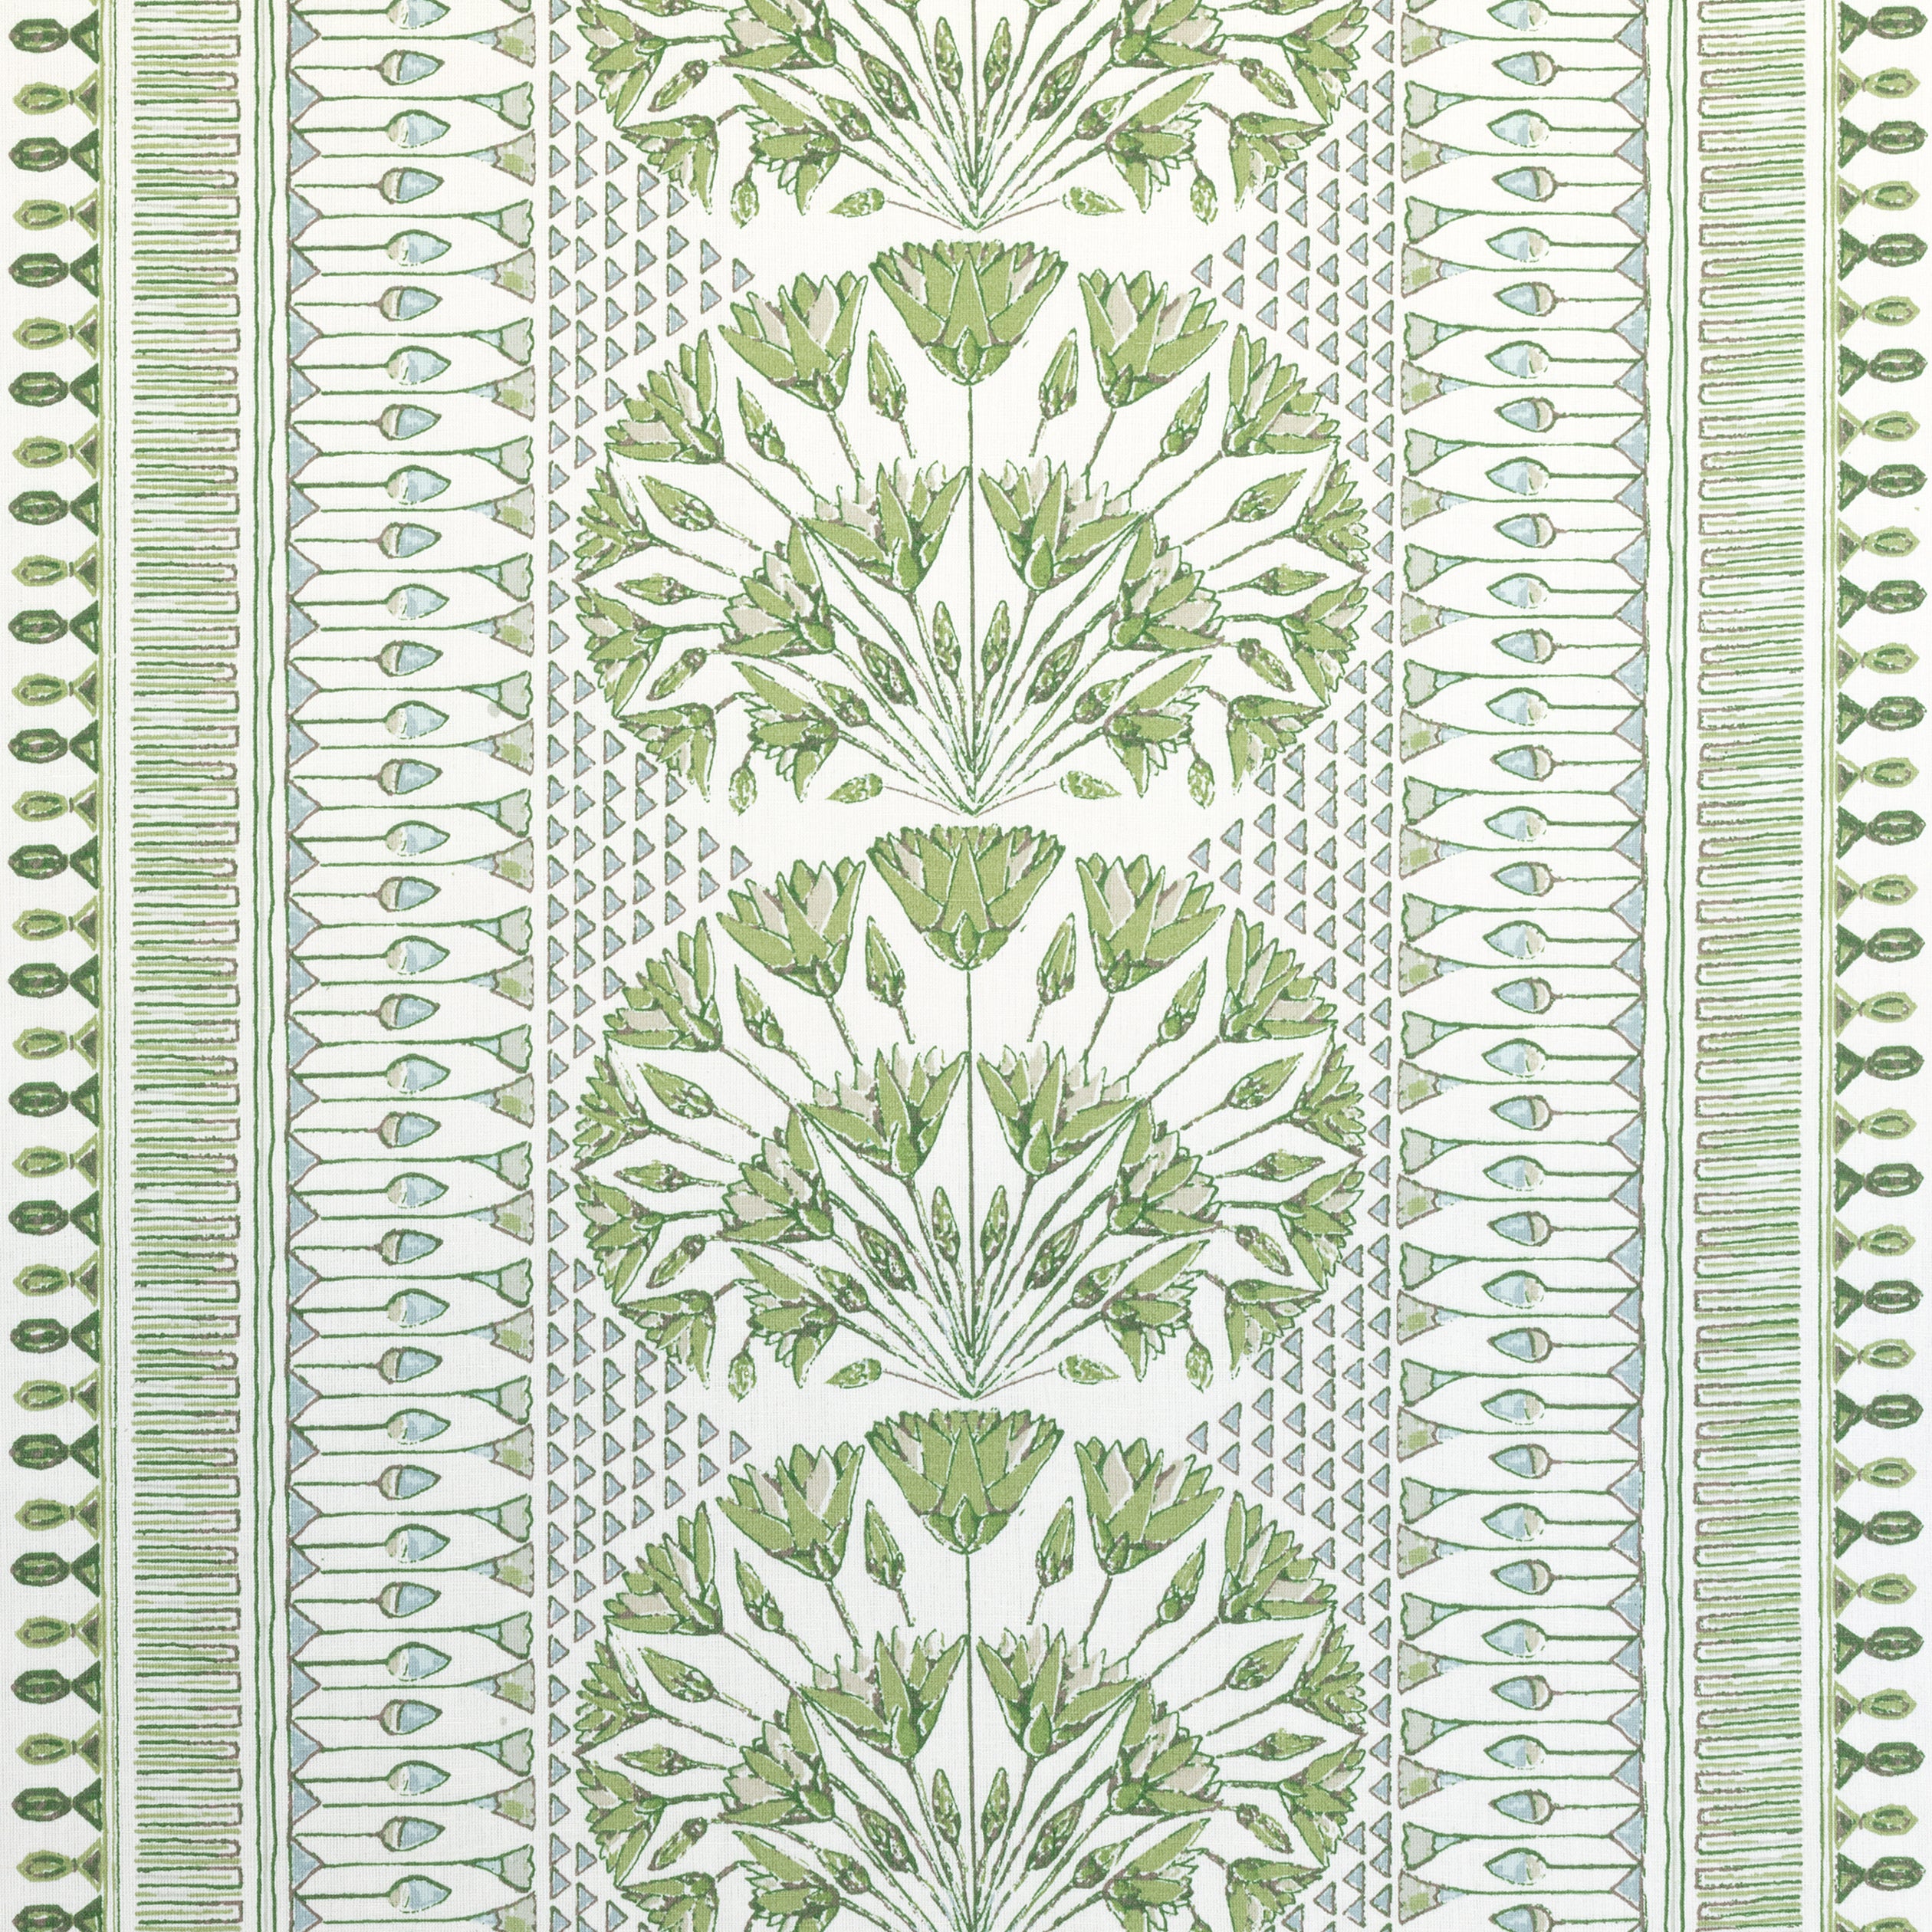 Cairo fabric in green and white  color - pattern number AF9623 - by Anna French in the Savoy collection